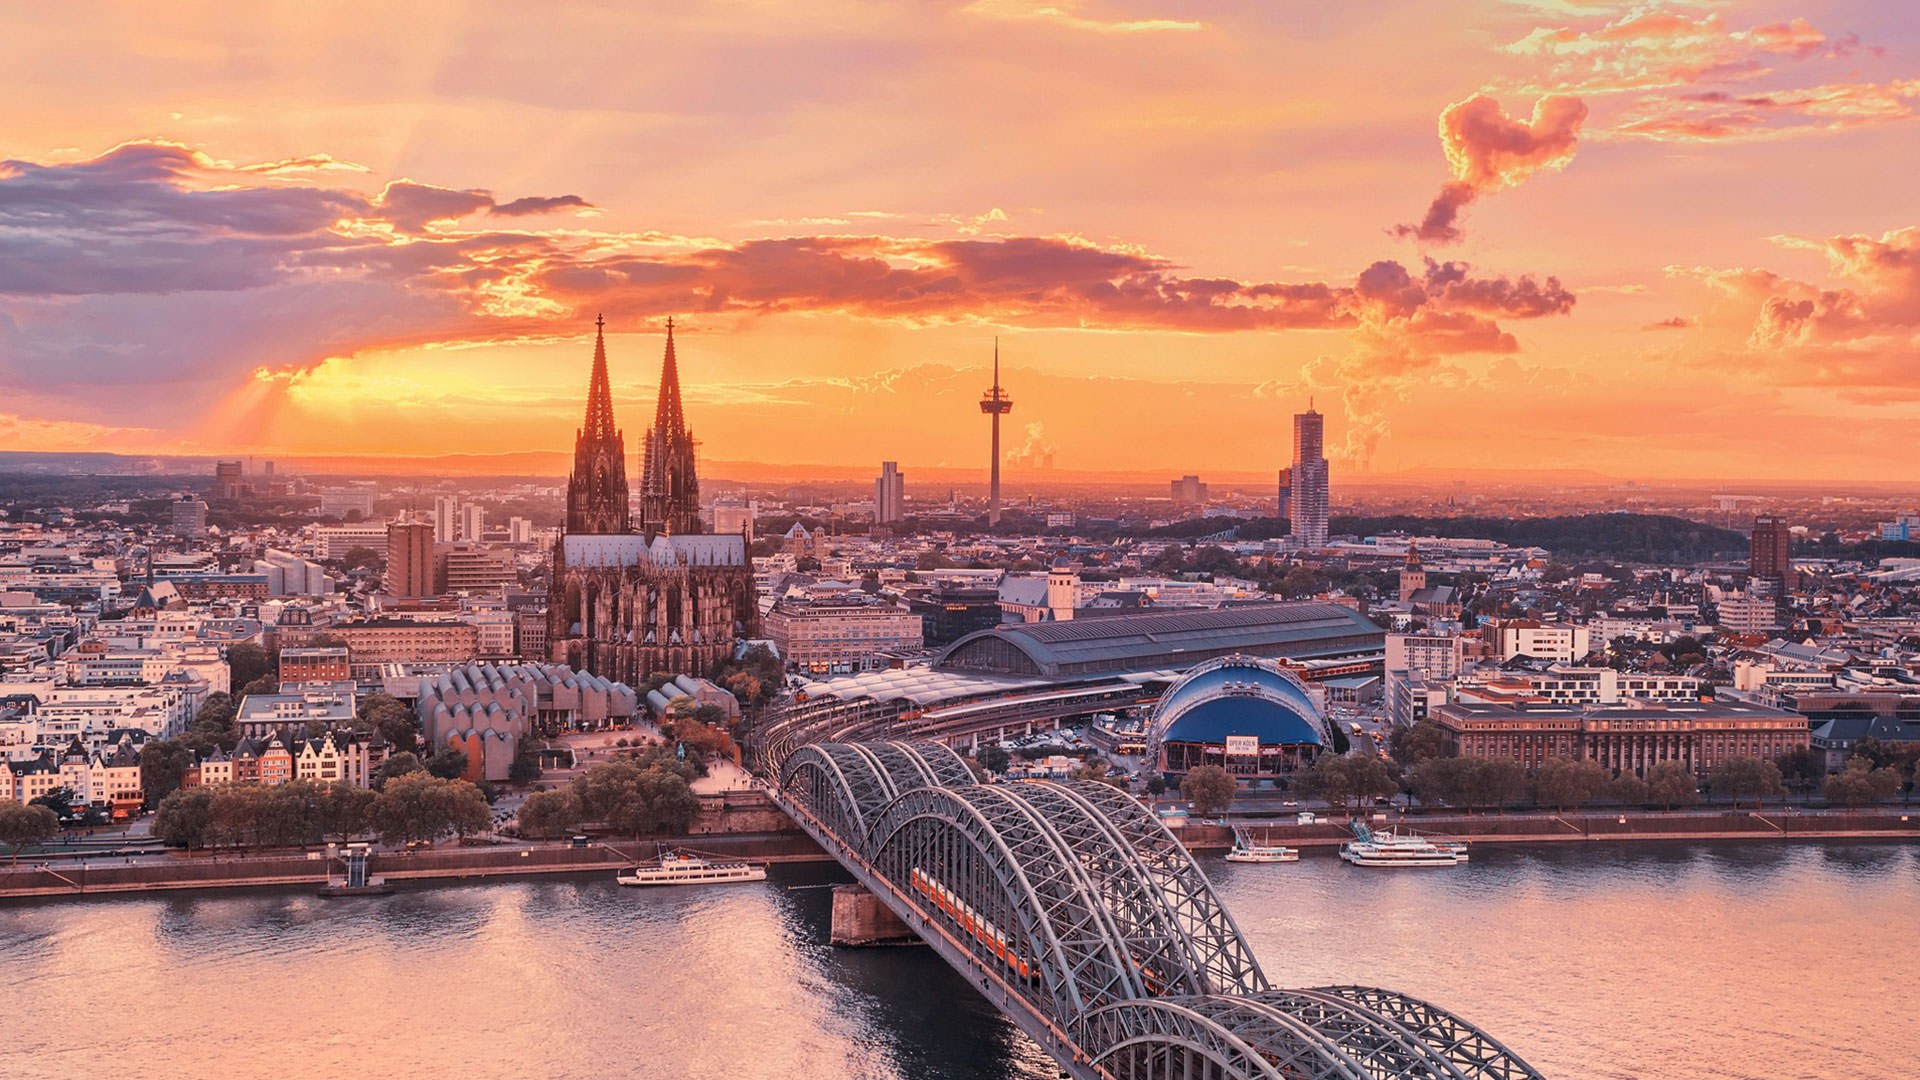 General 1920x1080 Germany cityscape sunset city Cologne bridge Cologne Cathedral orange sky